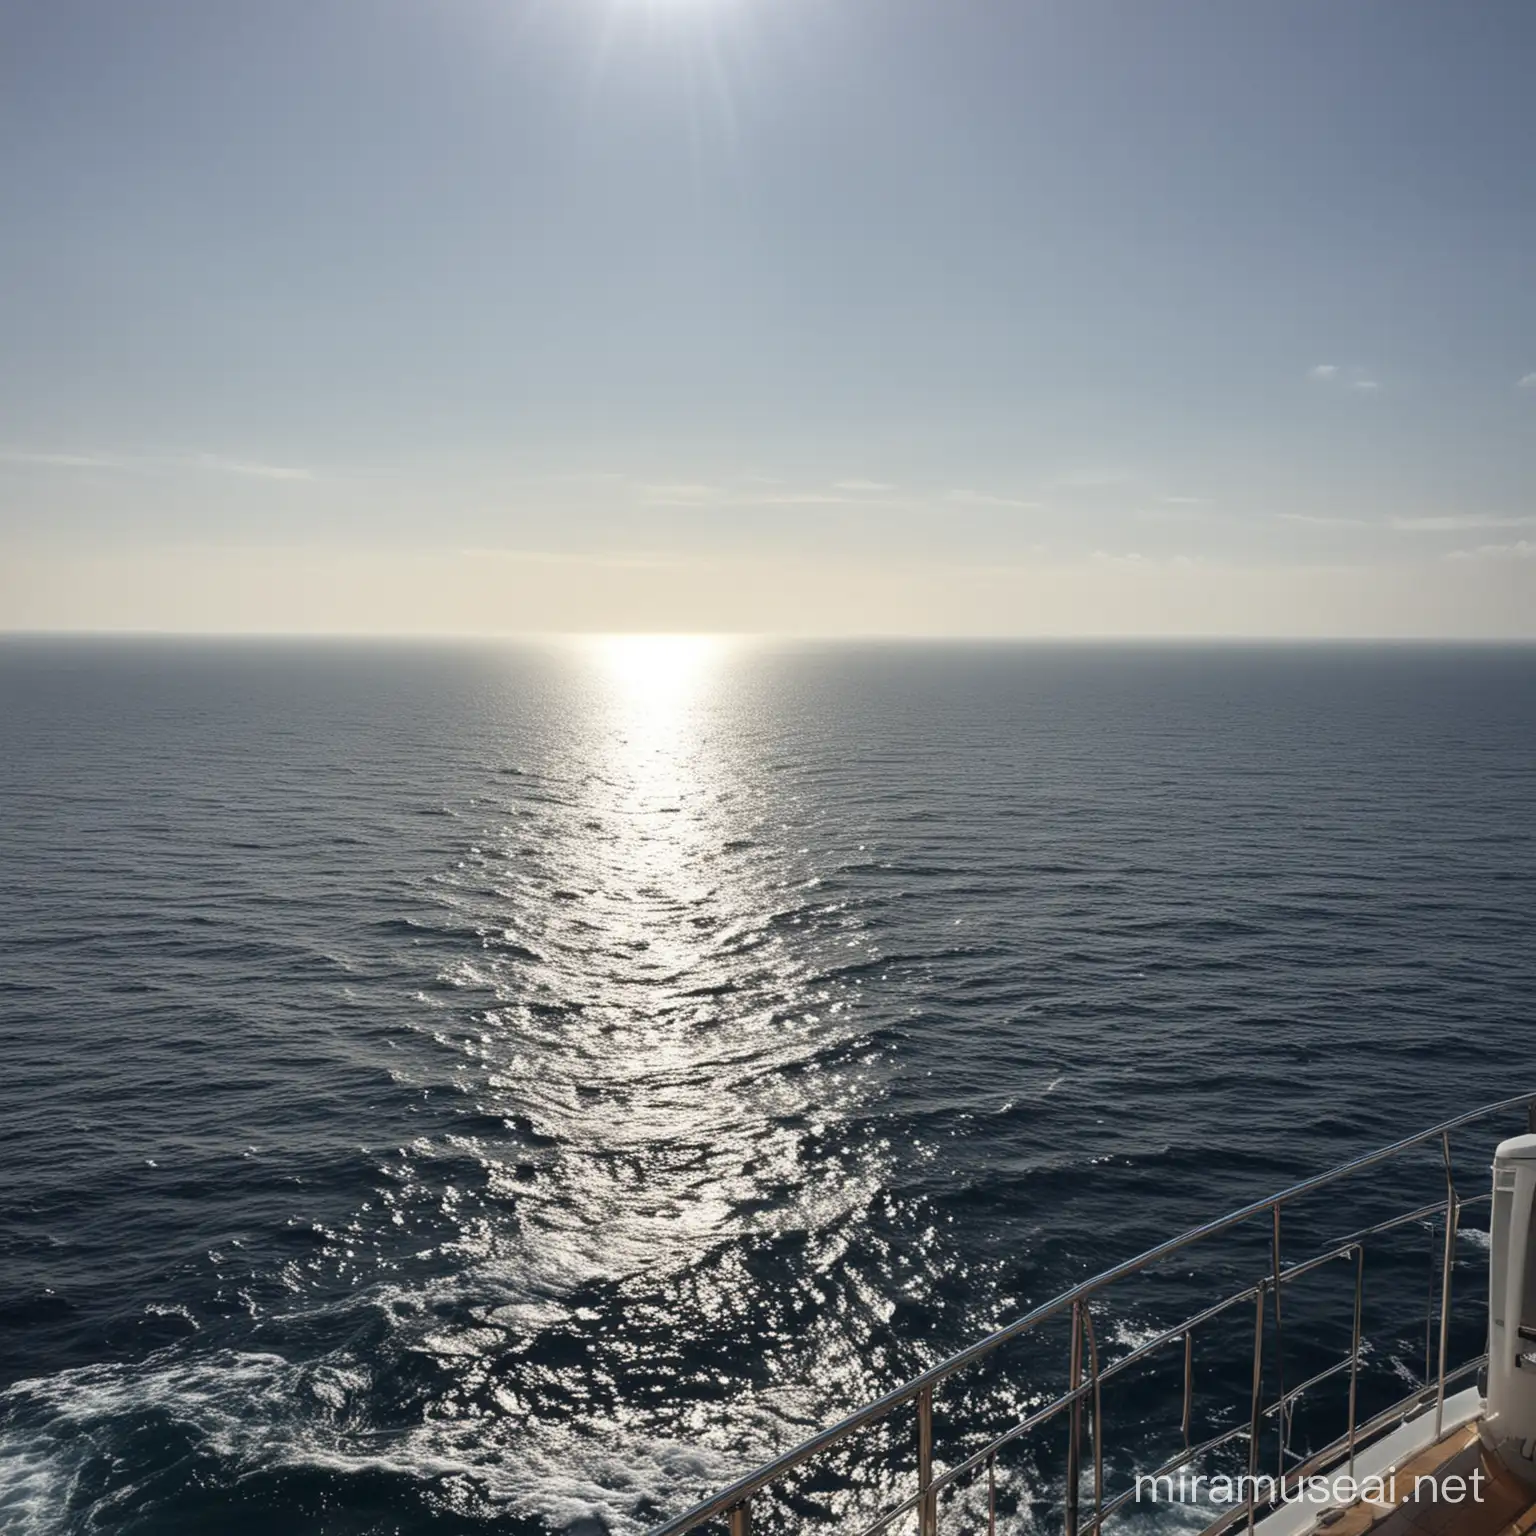 Cruise Ship Seascape Majestic Ocean View from the Deck